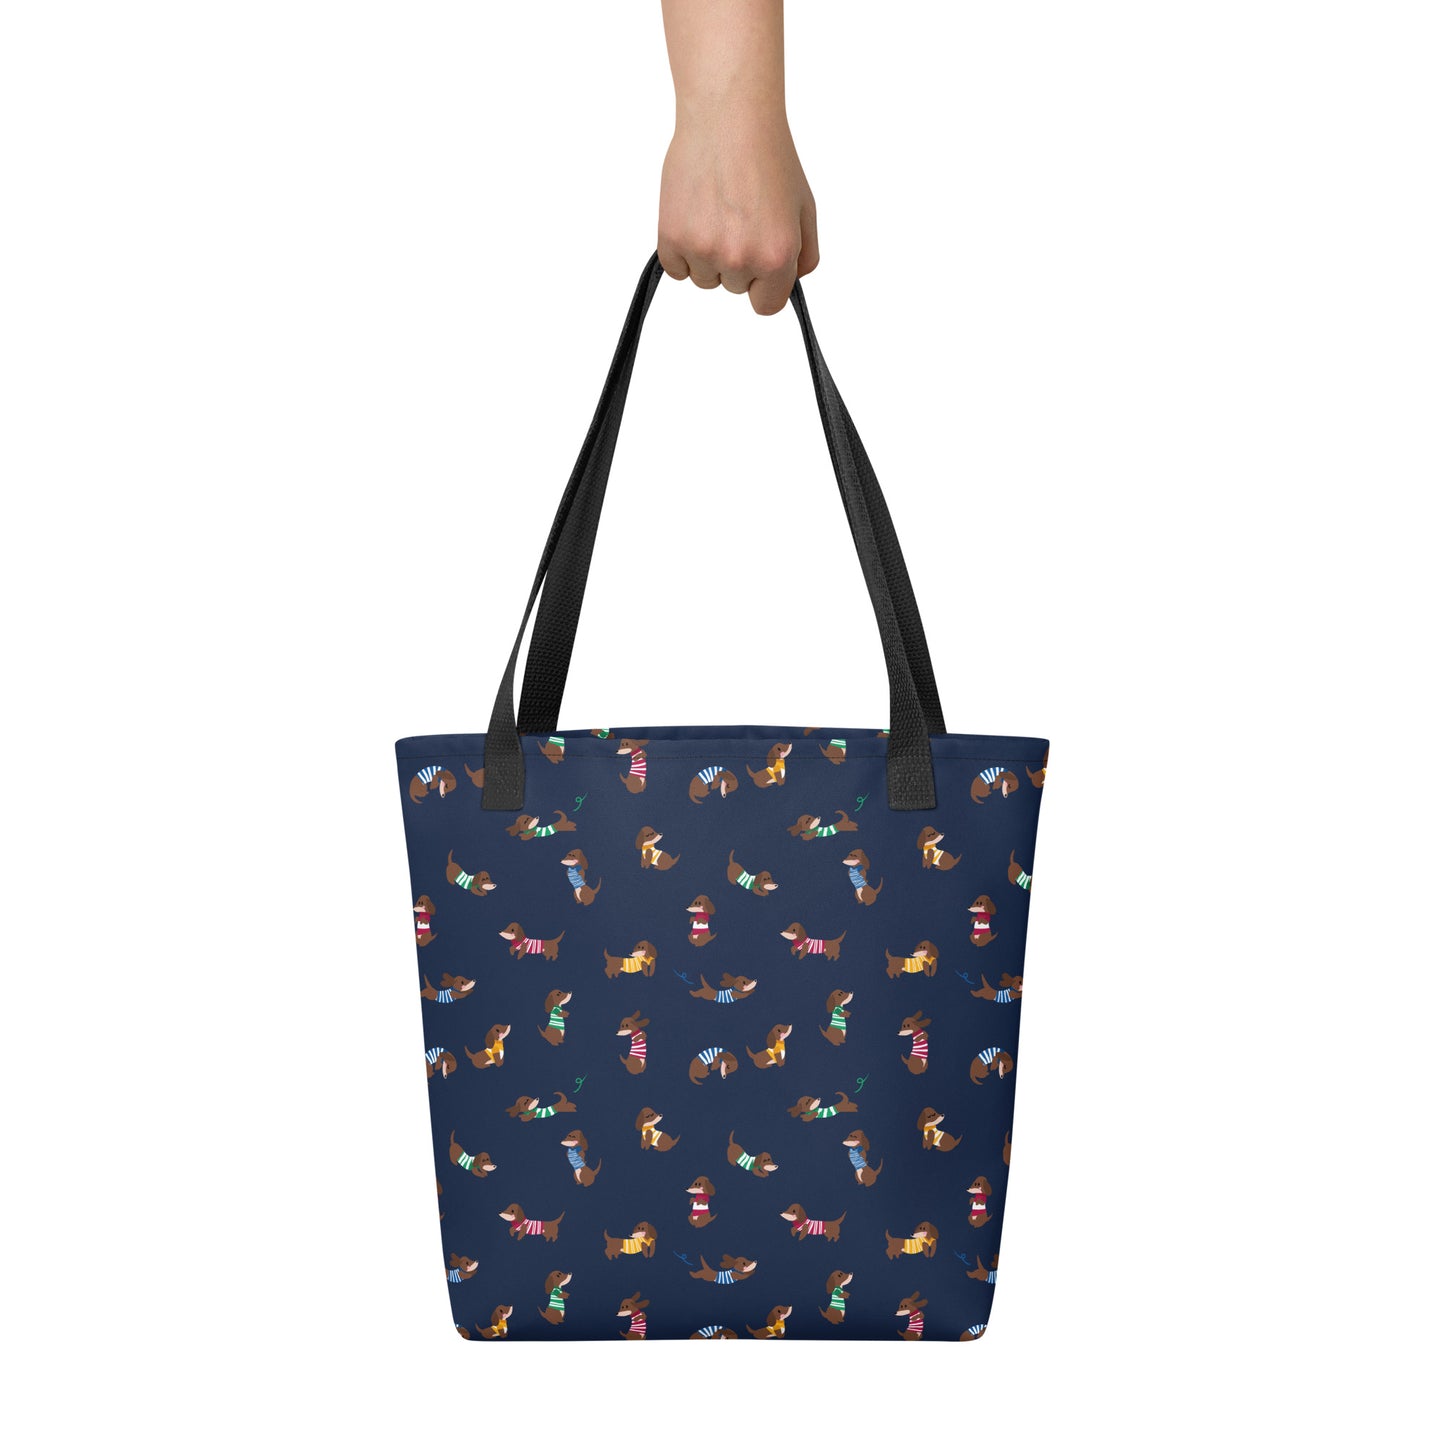 Dachshunds in Stripes Patterned Tote Bag